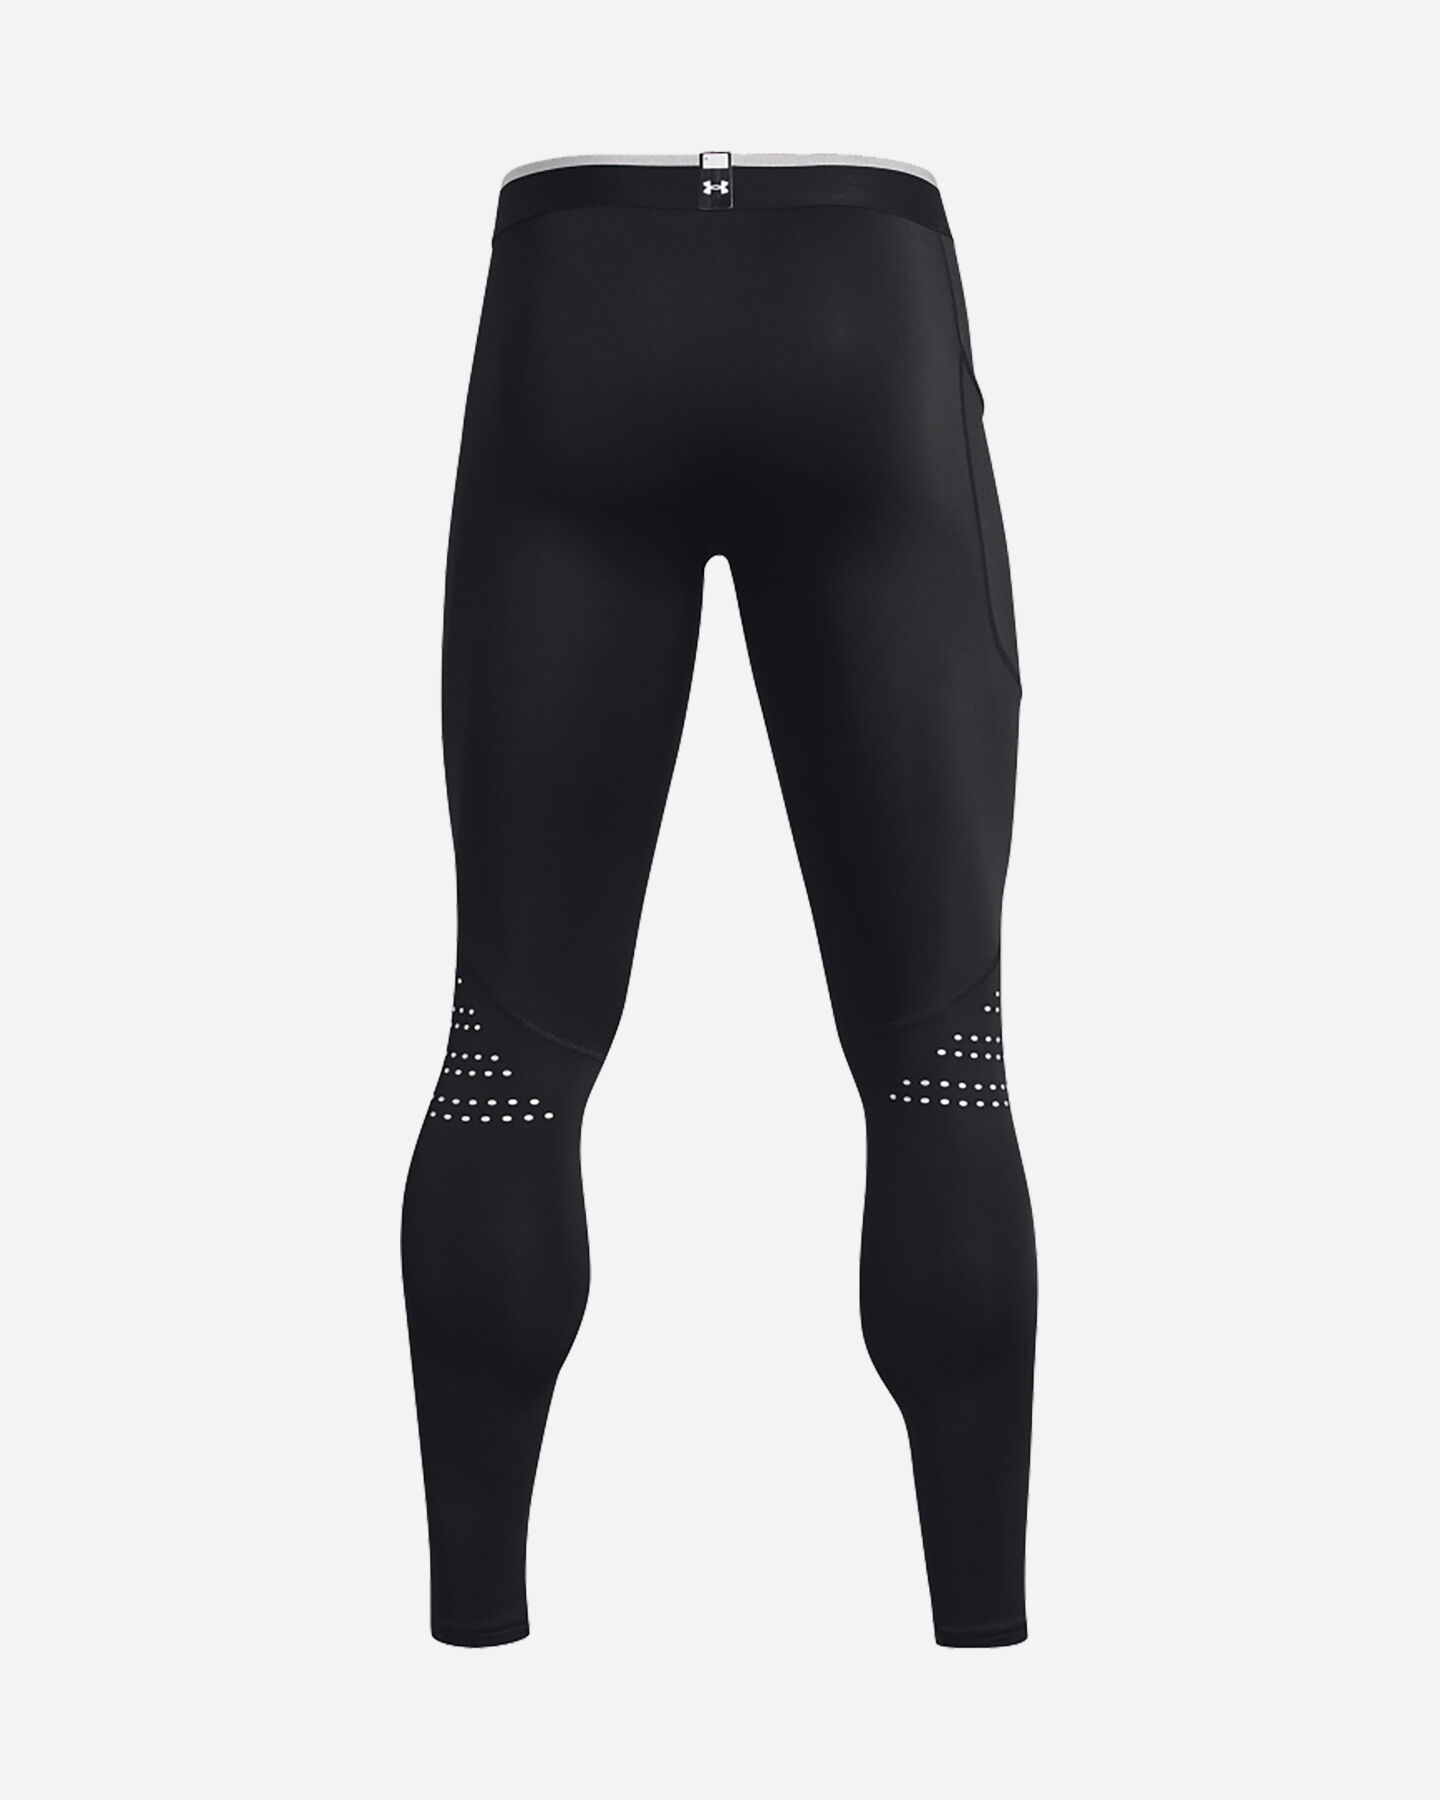  Pantalone training UNDER ARMOUR CG ARMOUR NOVELTY M S5459321|0001|SM scatto 1